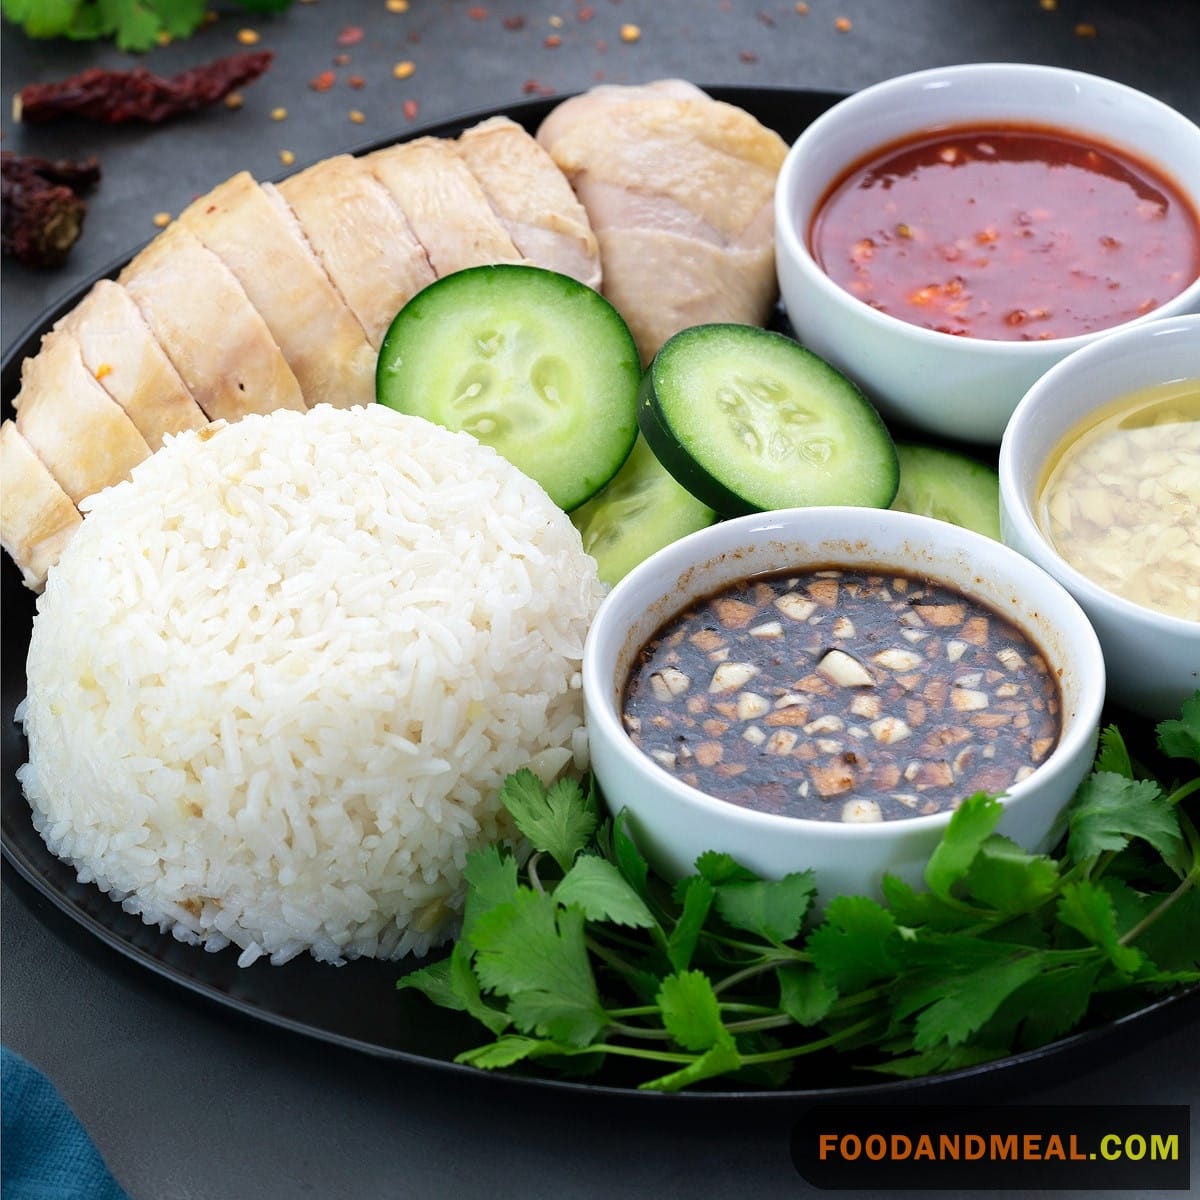 Soy Sesame Oil Dip Provides A Tangy, Nutty Component To Balance The Rice And Chicken.